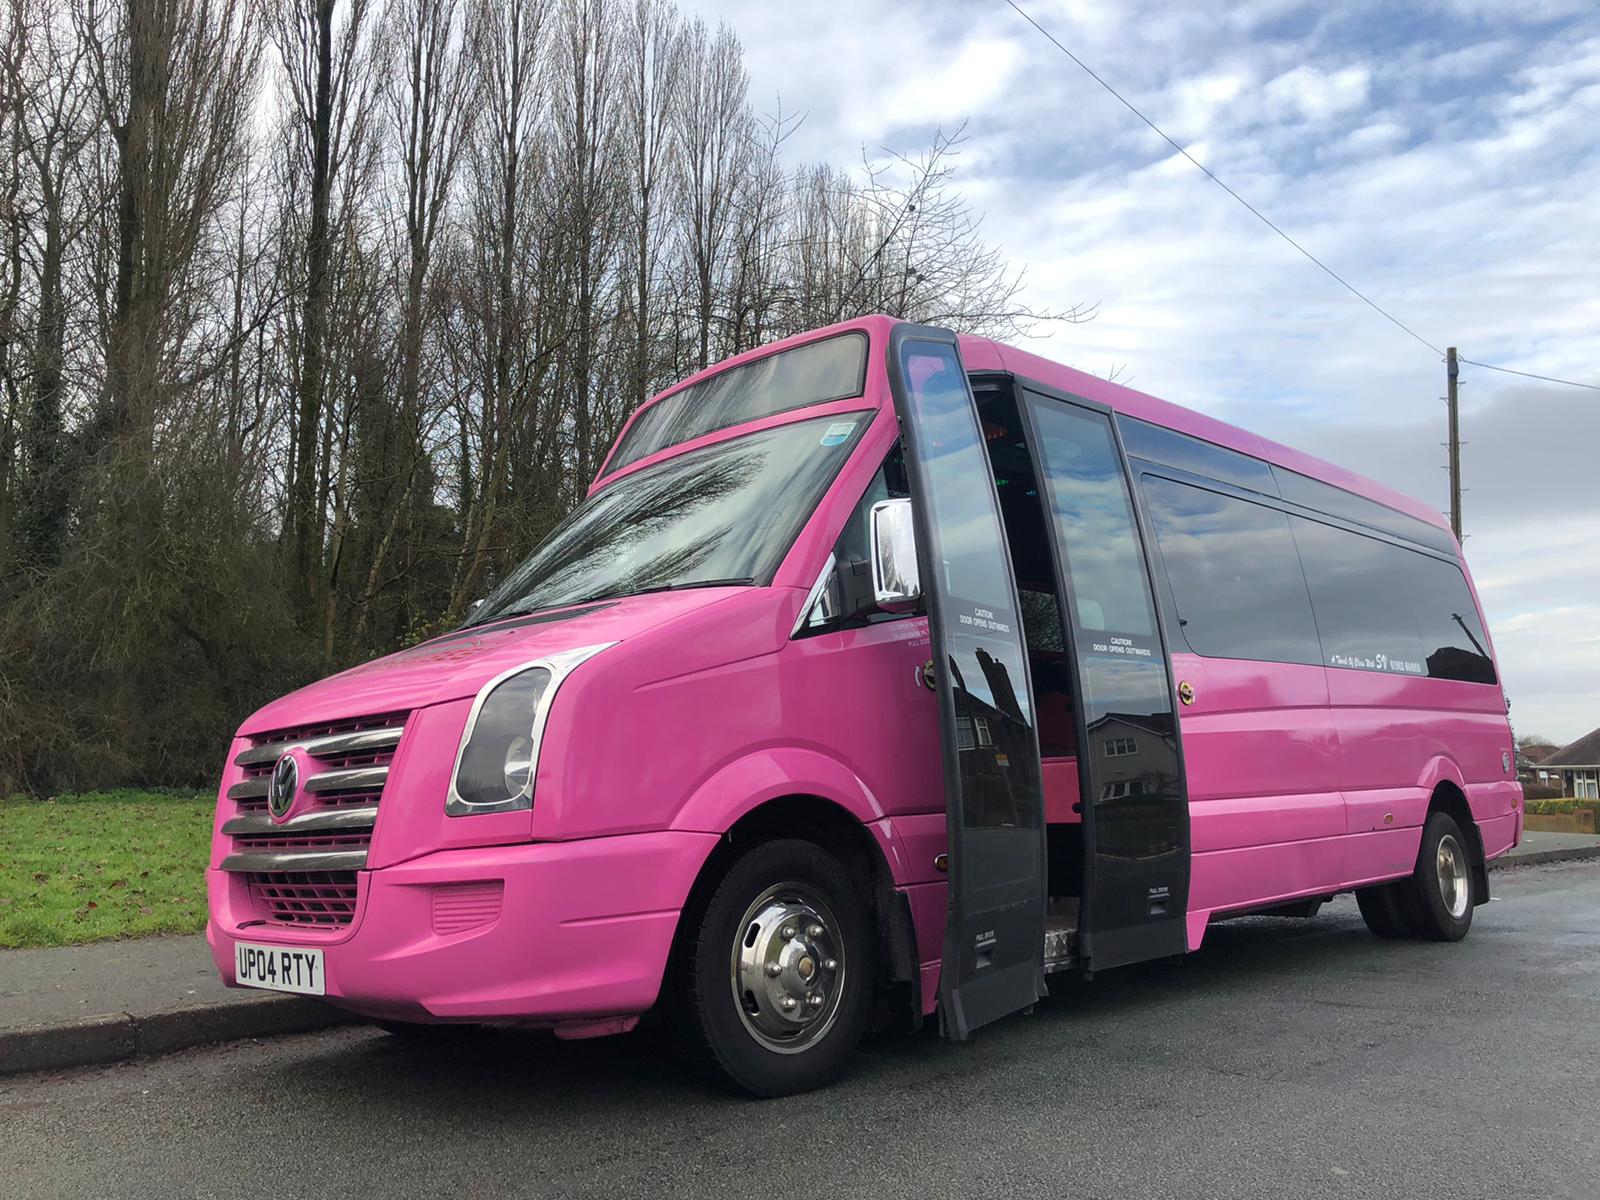 Maximising Fun: Essential Features to Look for in Your UK Party Bus Hire